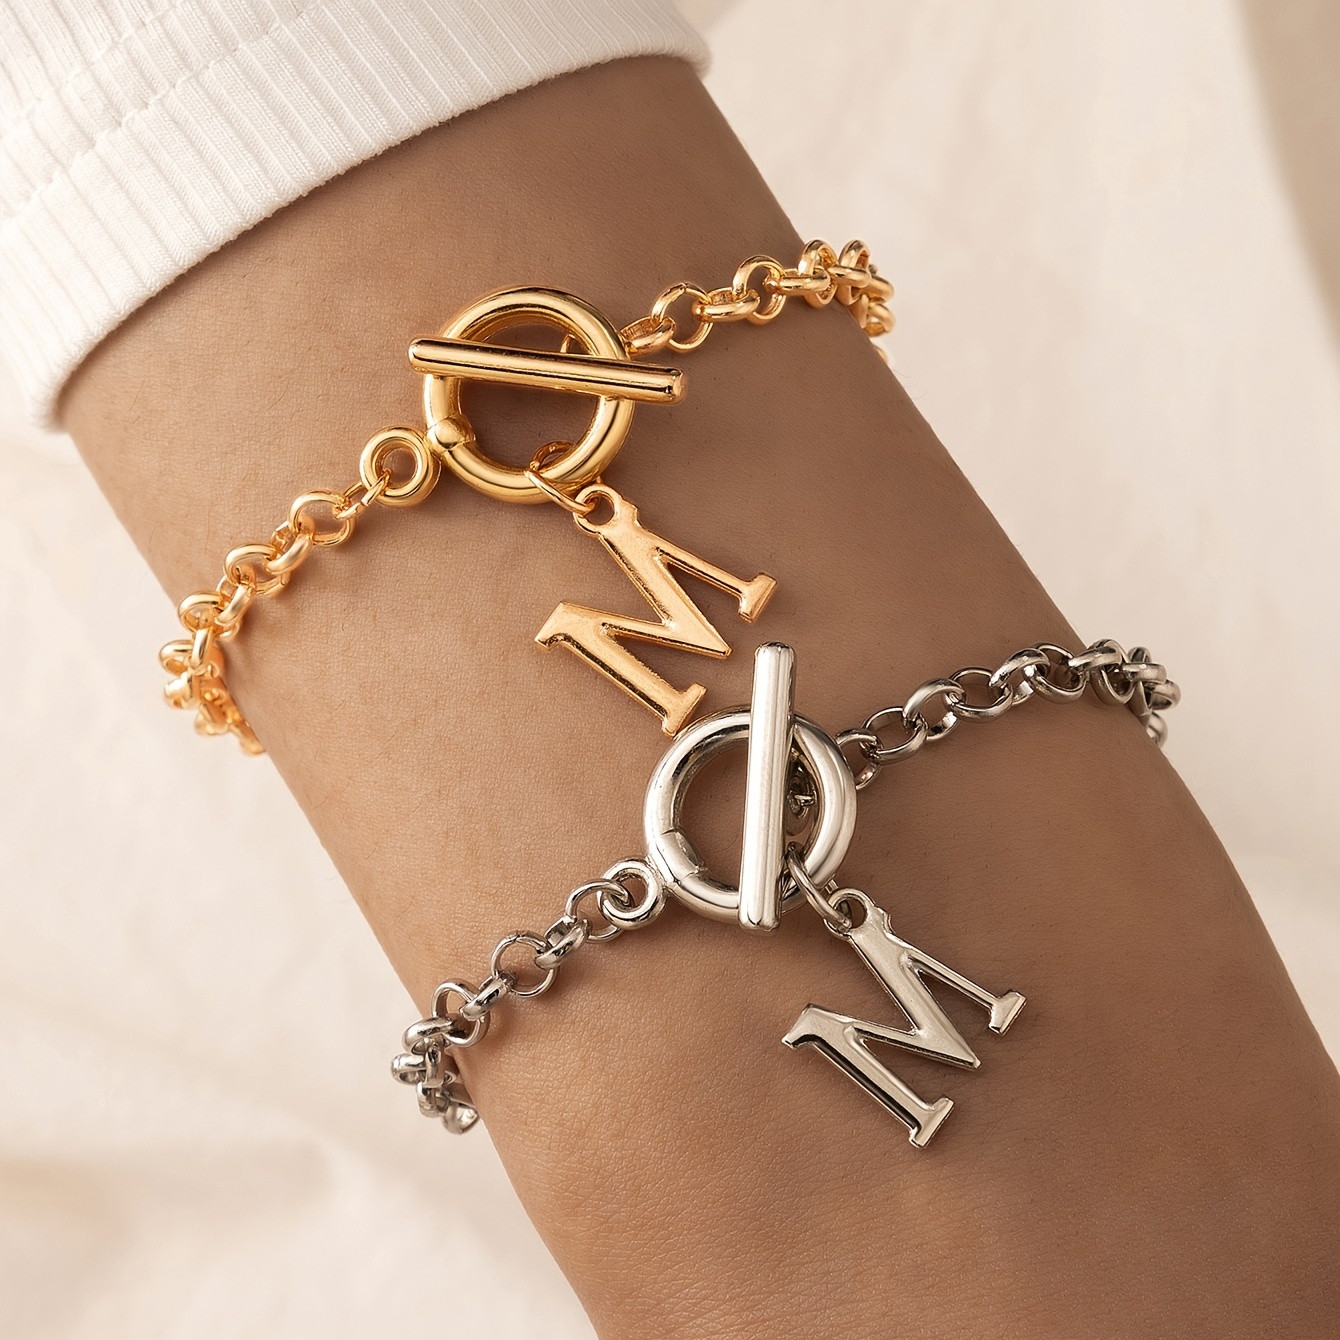 Ot Buckle Chain Bracelet M Letter Shape Pendant Simple Alloy Hand Chain For  Daily Clothing Accessories 2 Pcs, 90 Days Buyer Protection